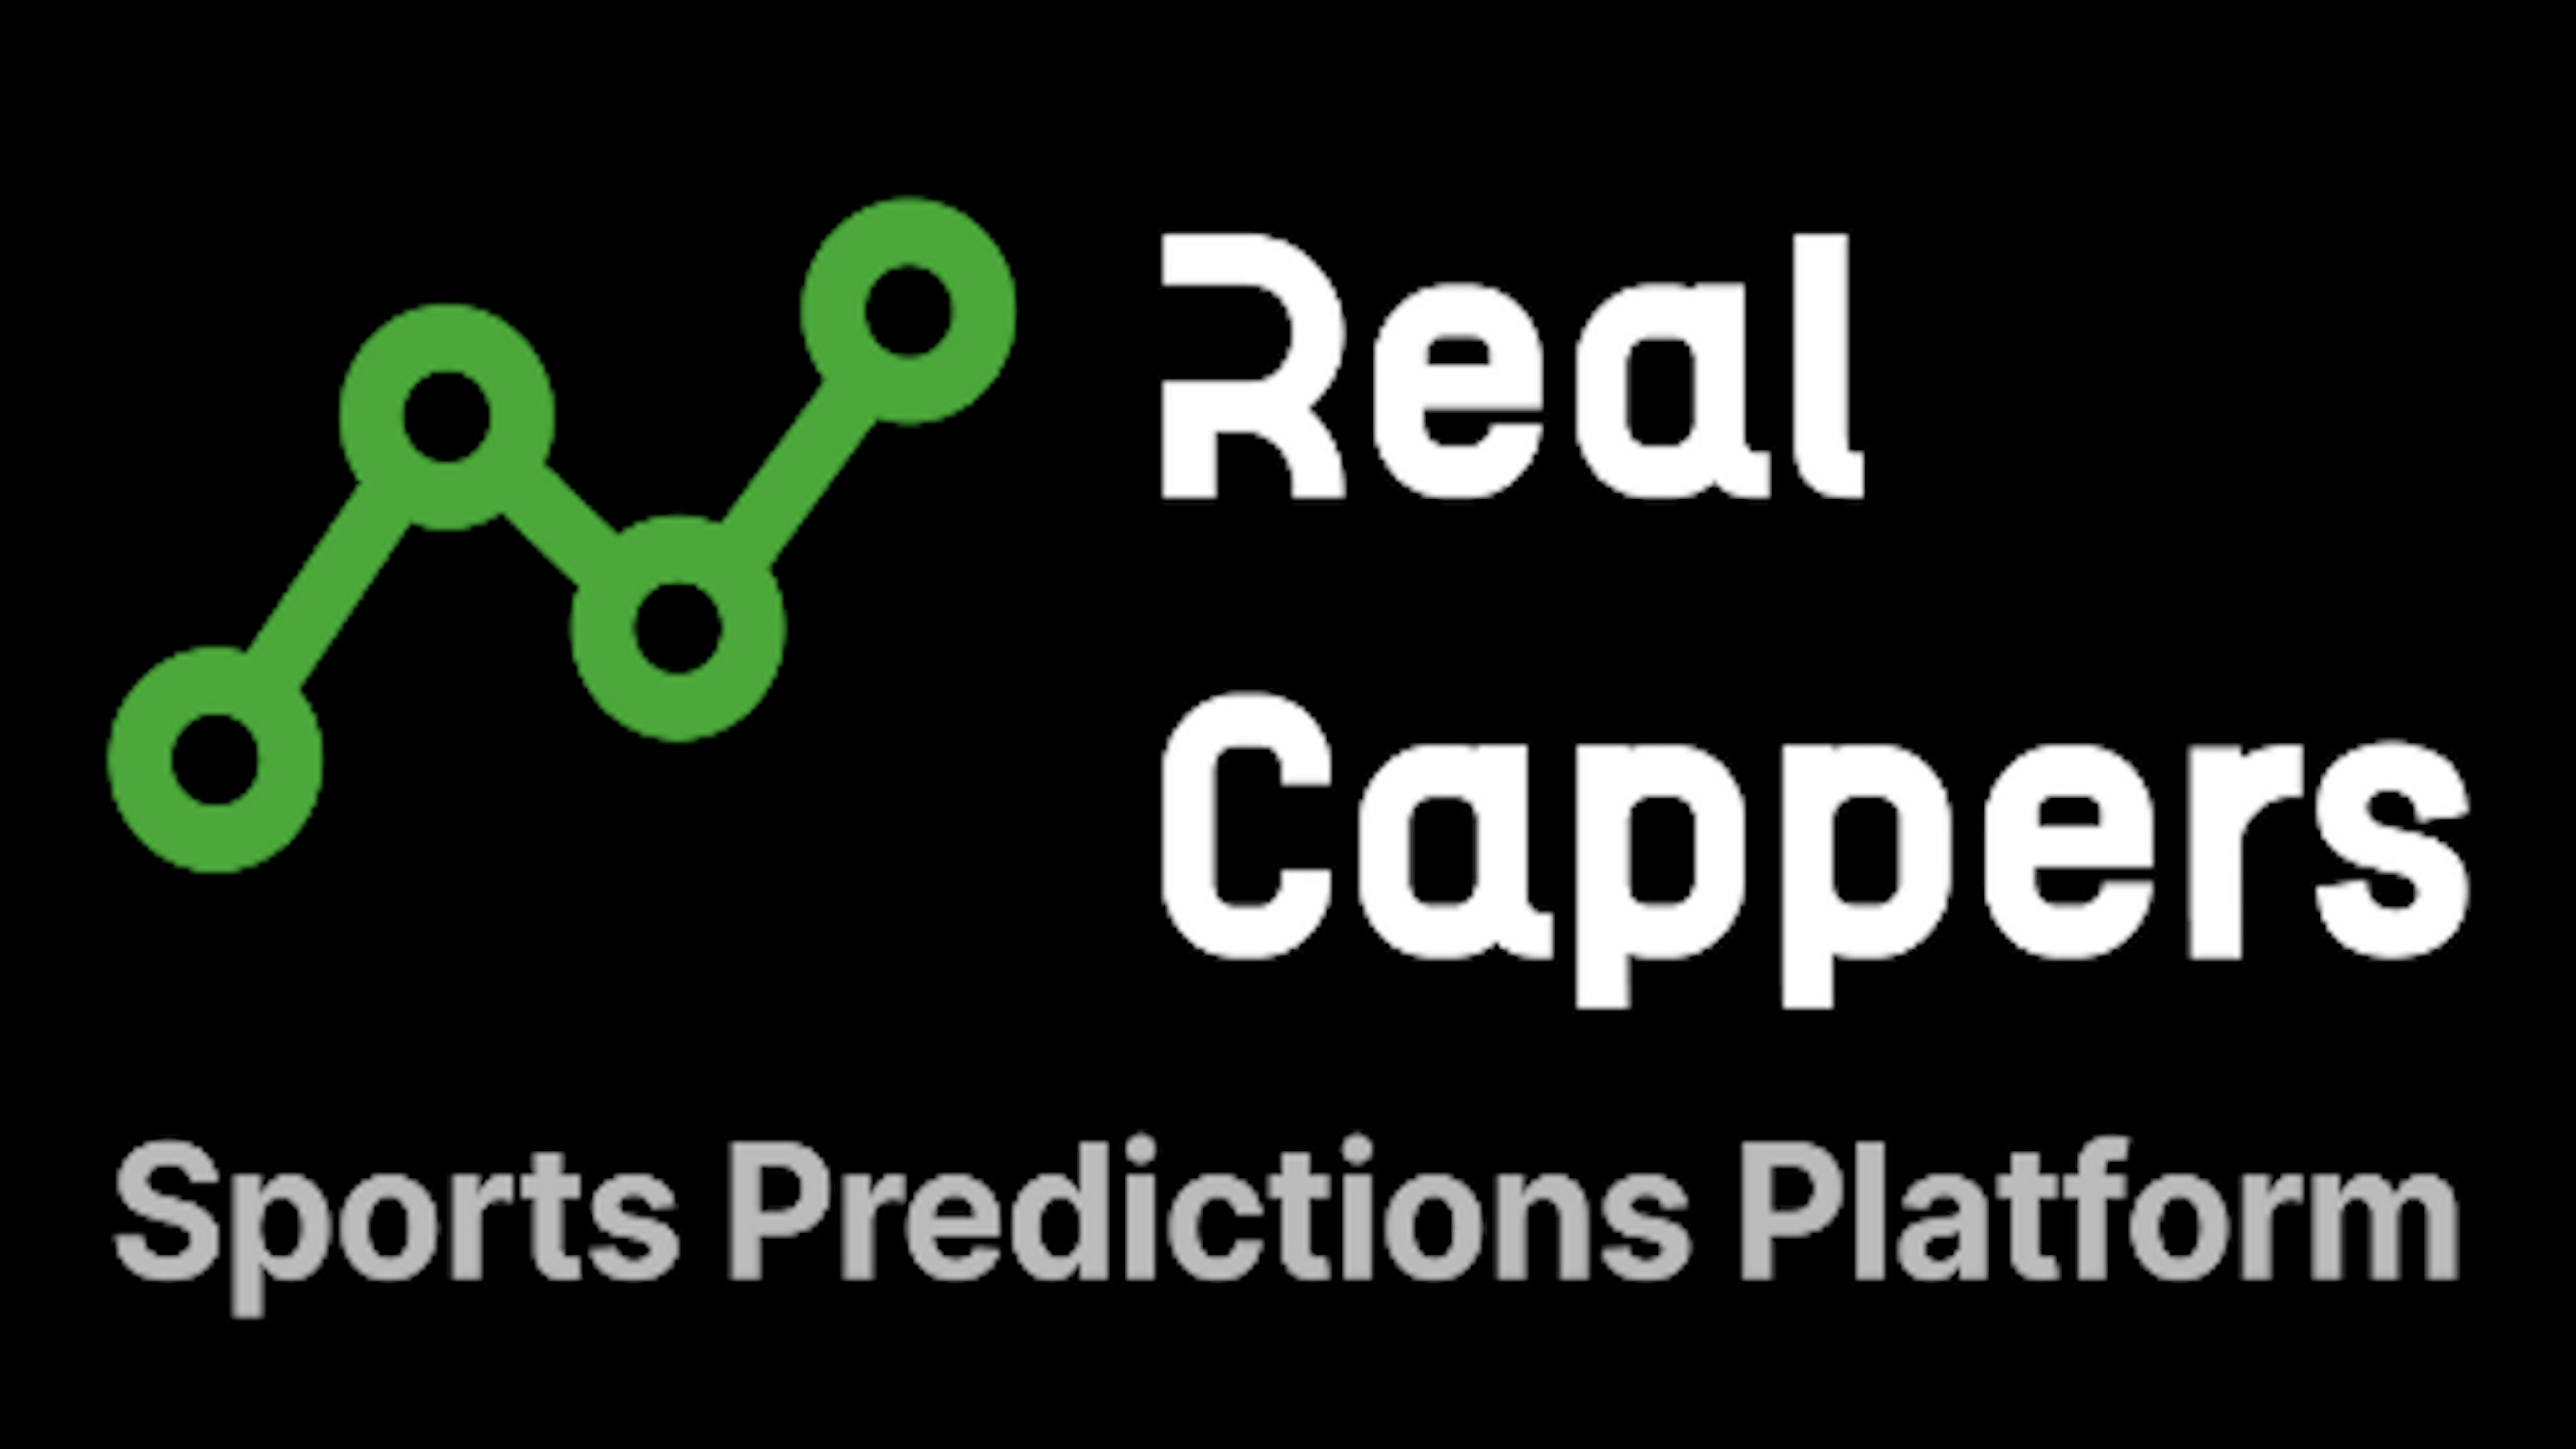 google realcappers promo 4096x2304